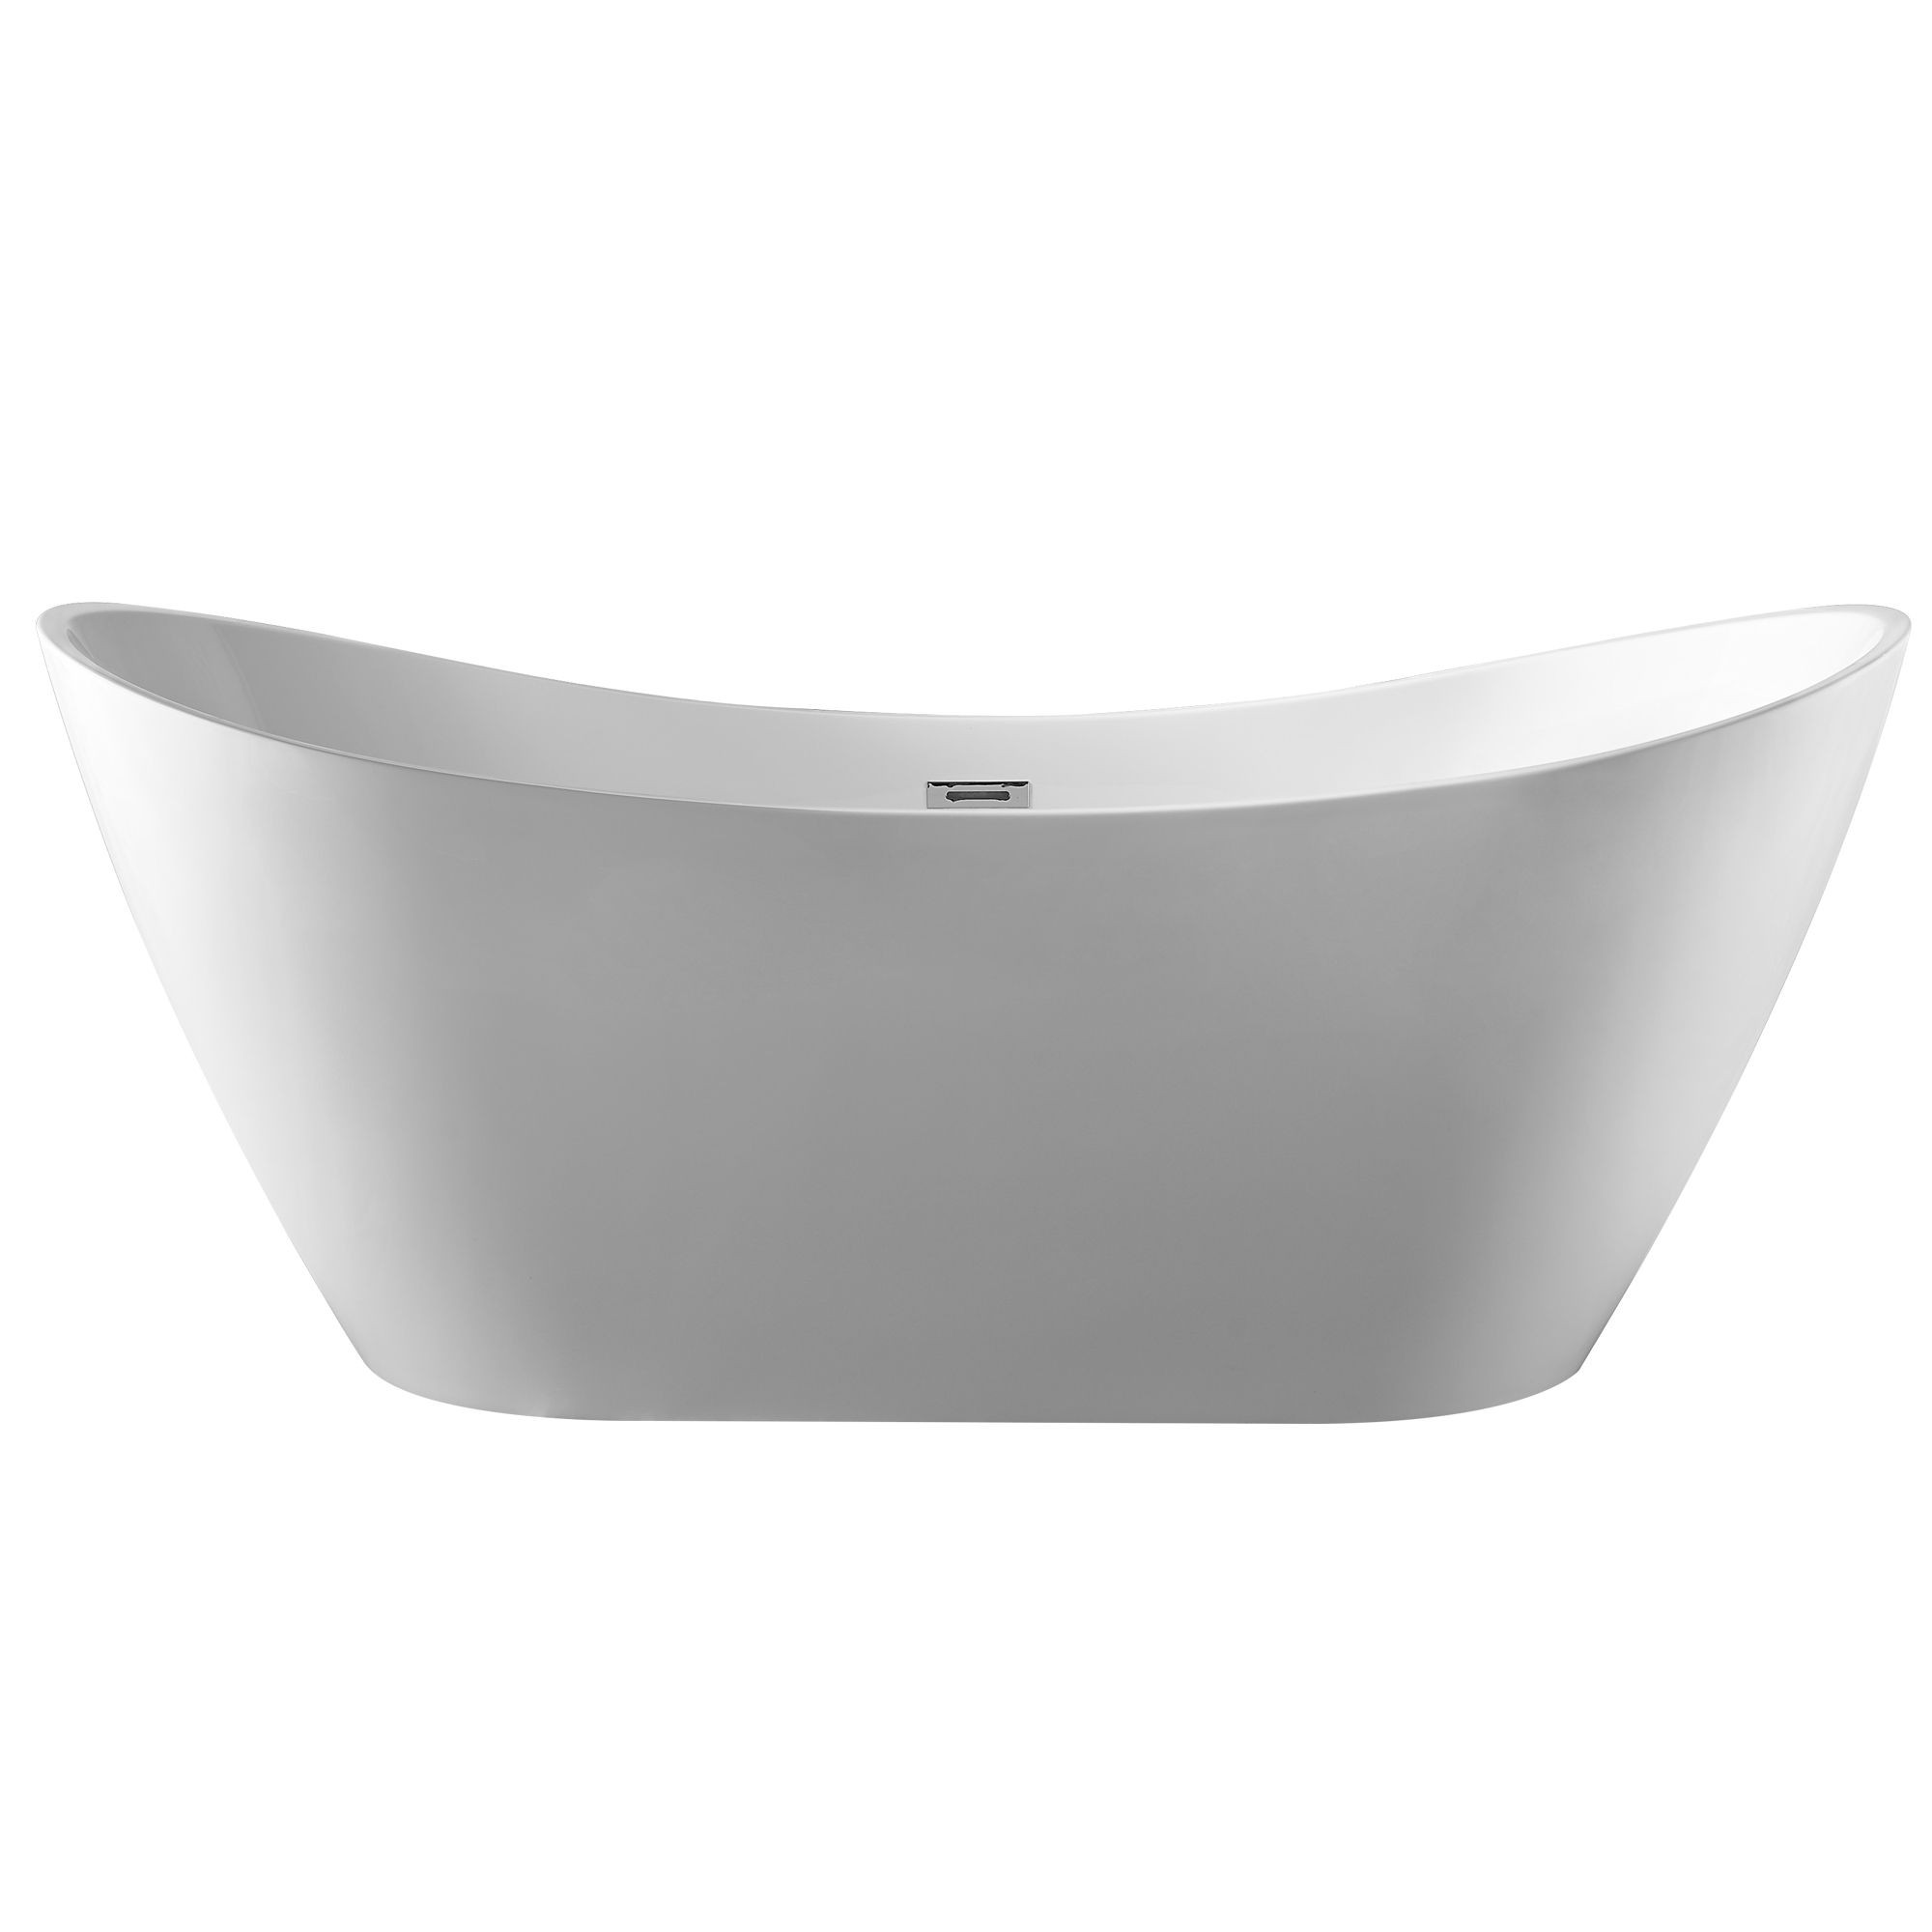 VANITY ART VA6903 71 INCH FREESTANDING ACRYLIC SOAKING BATHTUB WITH POLISHED CHROME SLOTTED OVERFLOW AND POP-UP DRAIN - WHITE